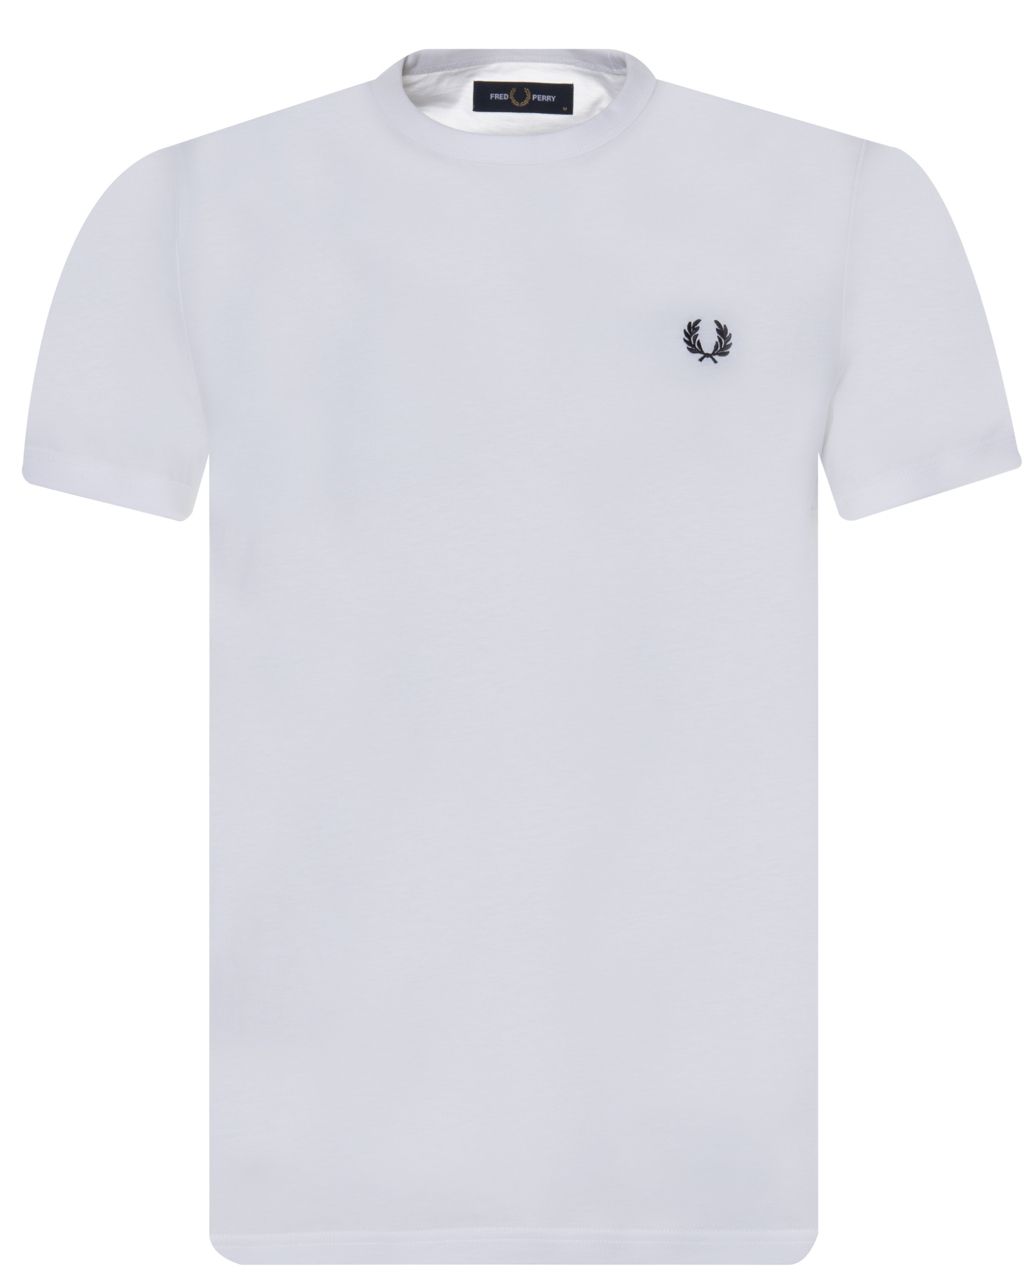 Fred Perry T-shirt KM Wit 066650-001-L